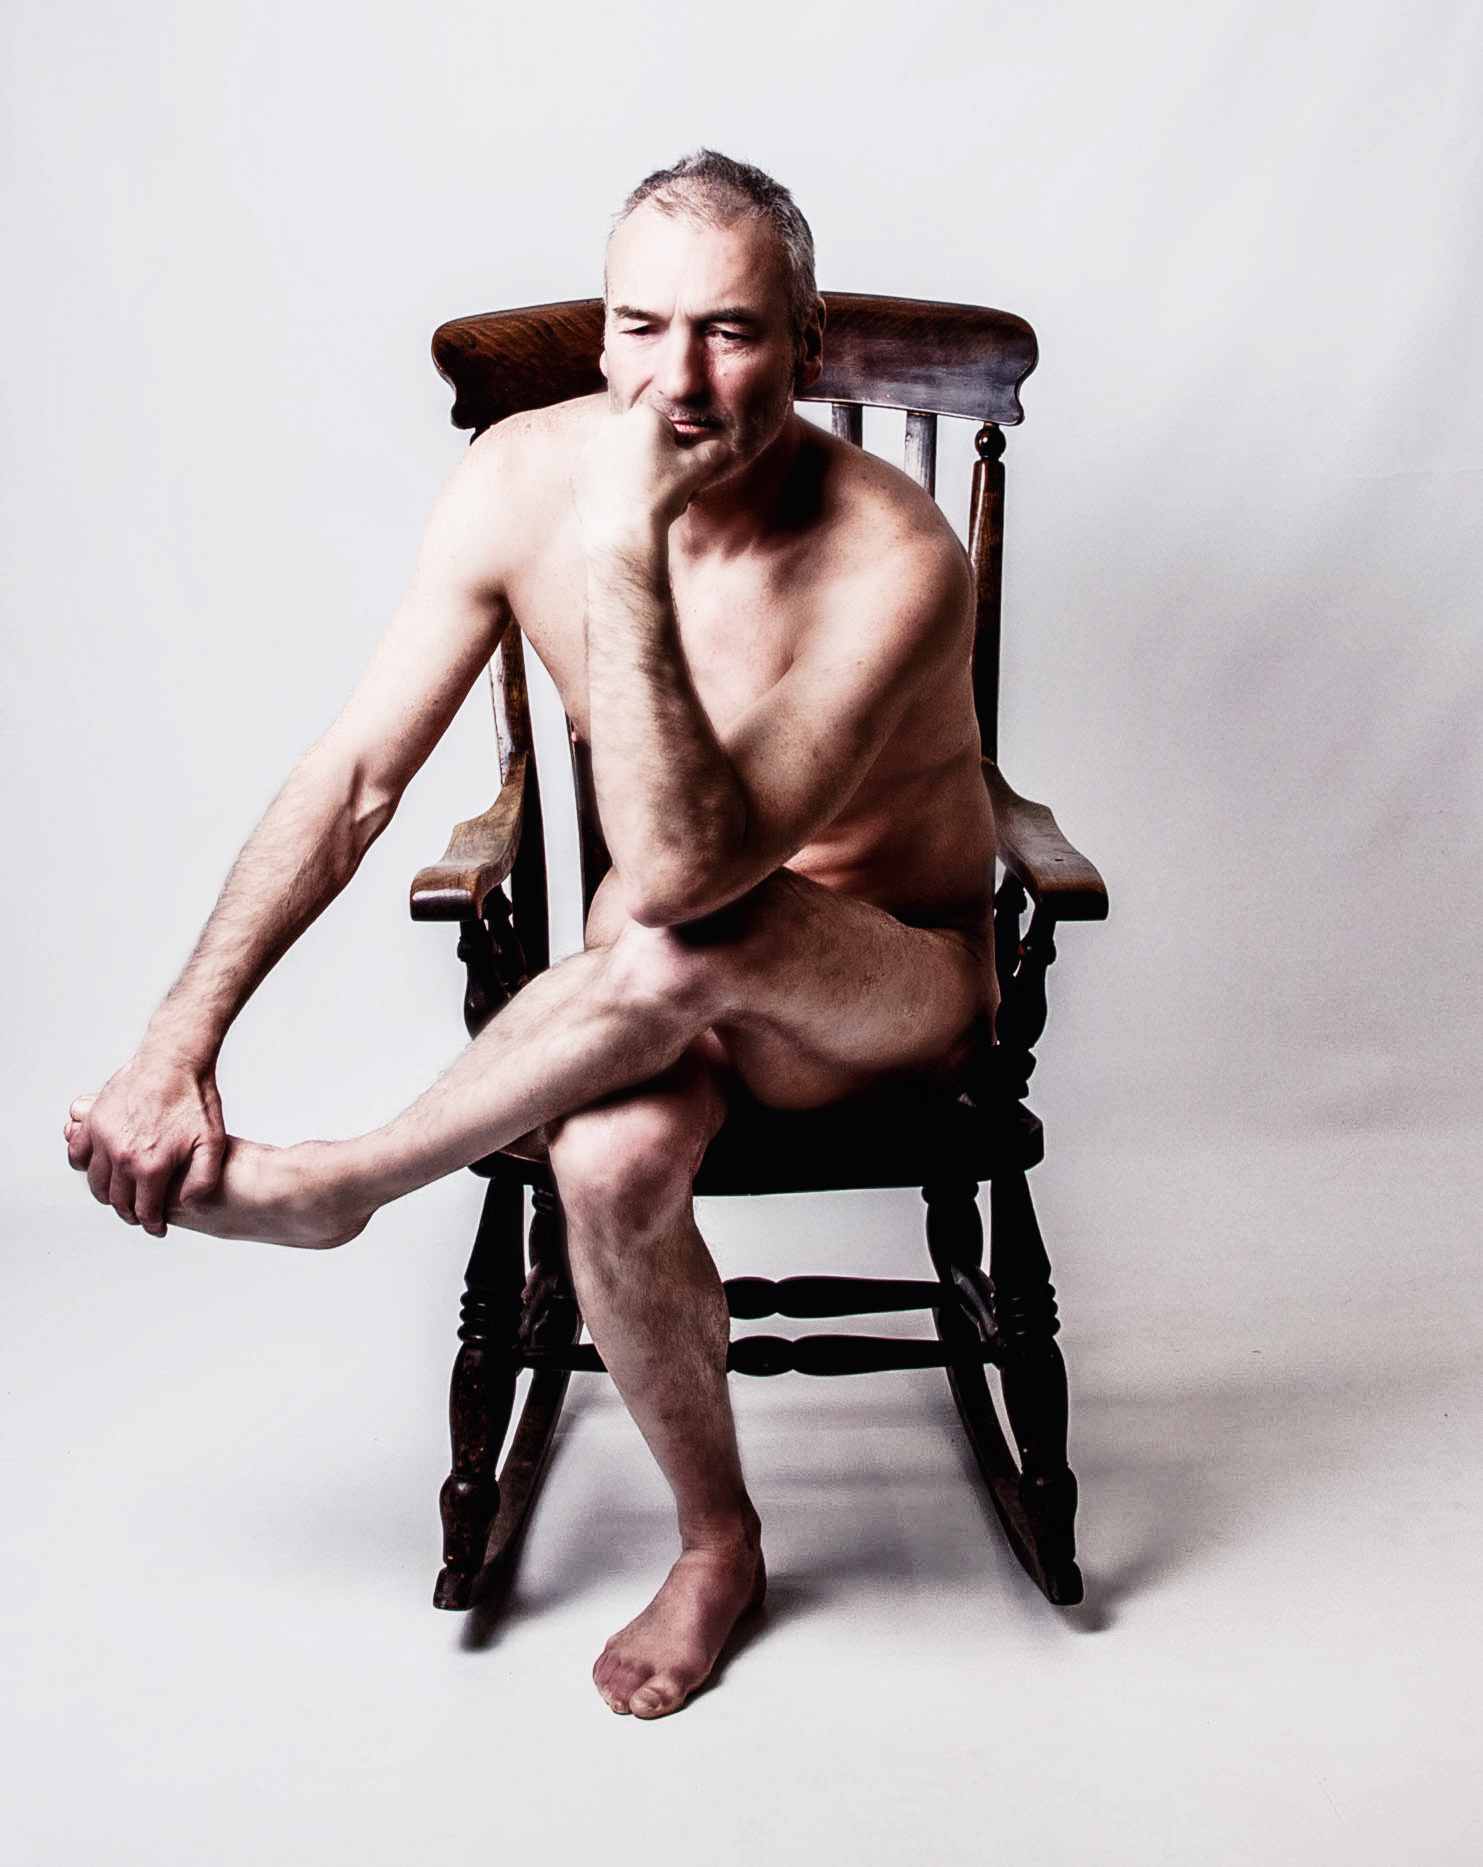 life model Julian, sat on a wooden chair for an artist to draw or sculpt